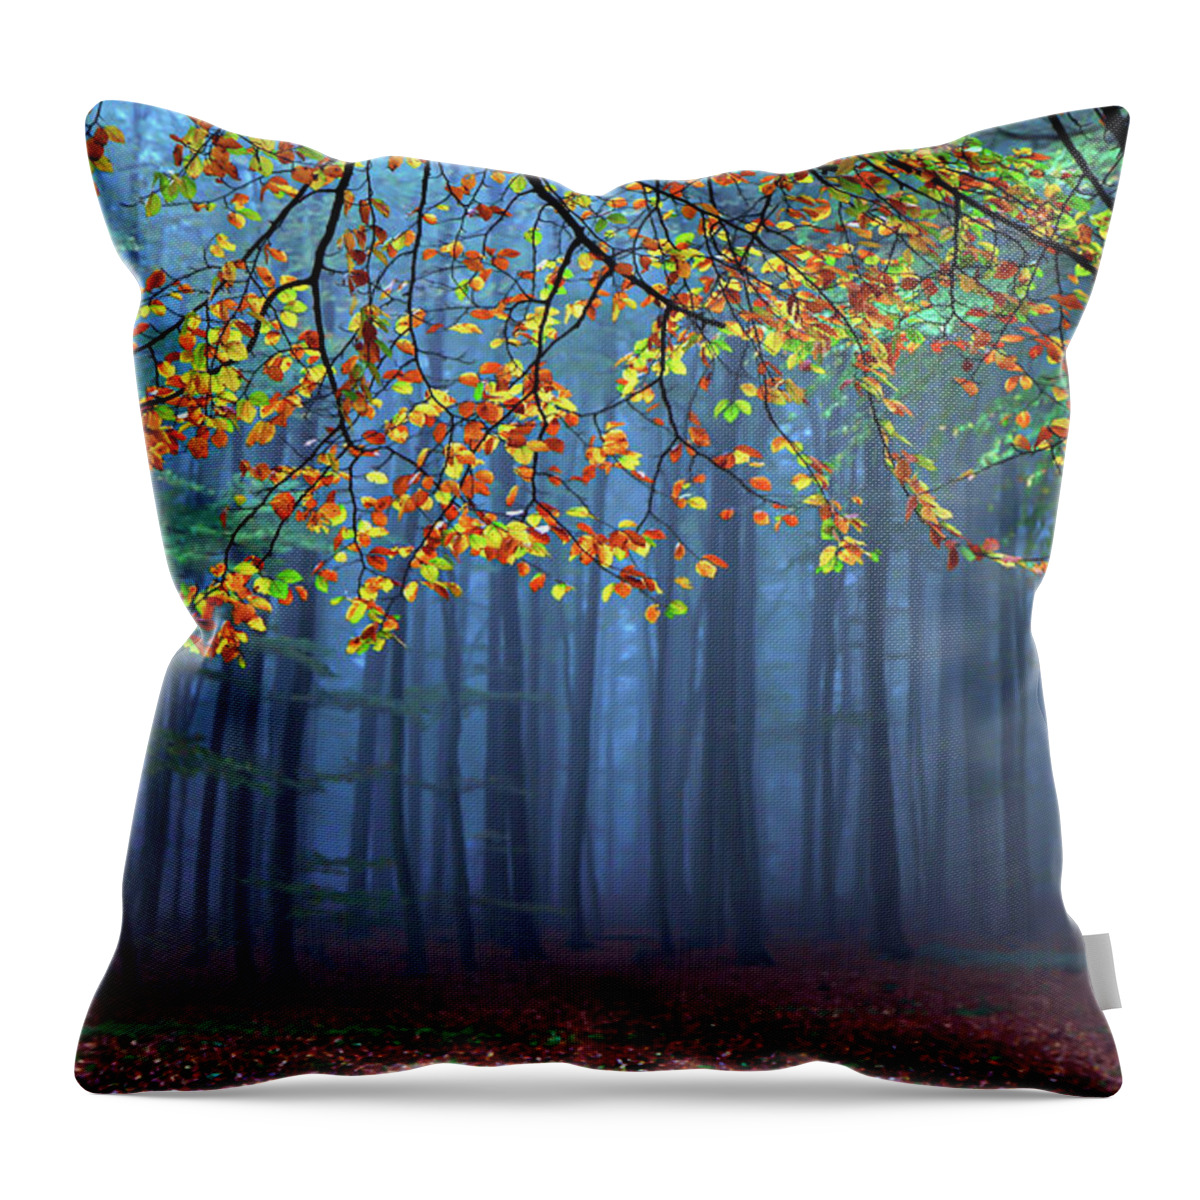 Autumn Throw Pillow featuring the photograph Seconds Before The Light Went Out by Roeselien Raimond